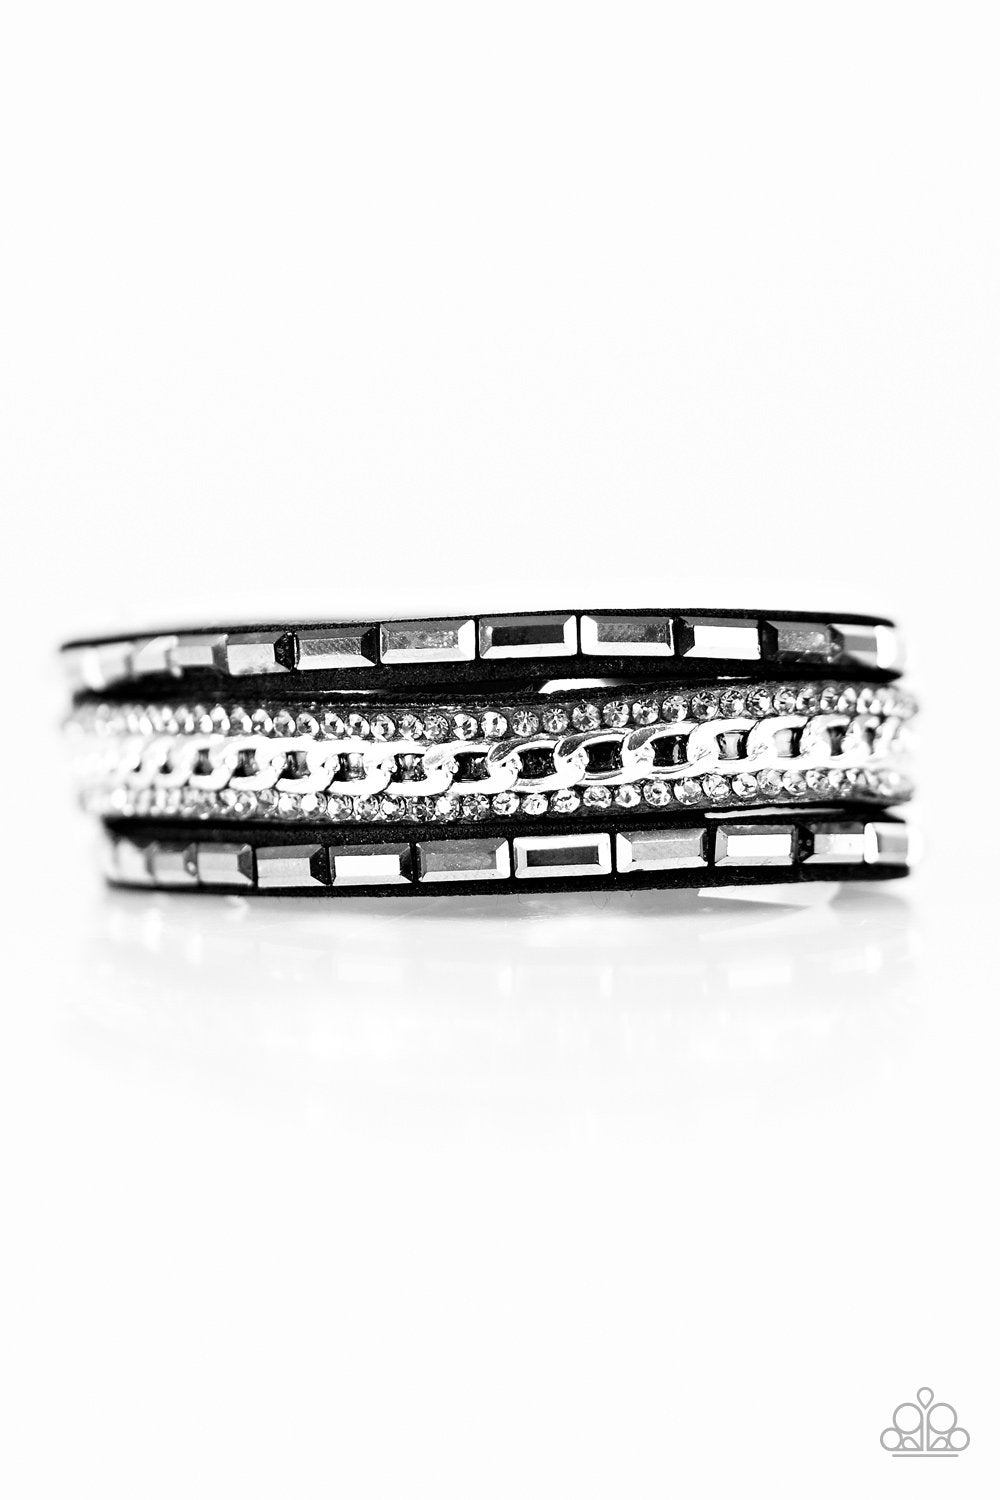 Girl Hustle Black and Silver Urban Wrap Snap Bracelet - Paparazzi Accessories-CarasShop.com - $5 Jewelry by Cara Jewels